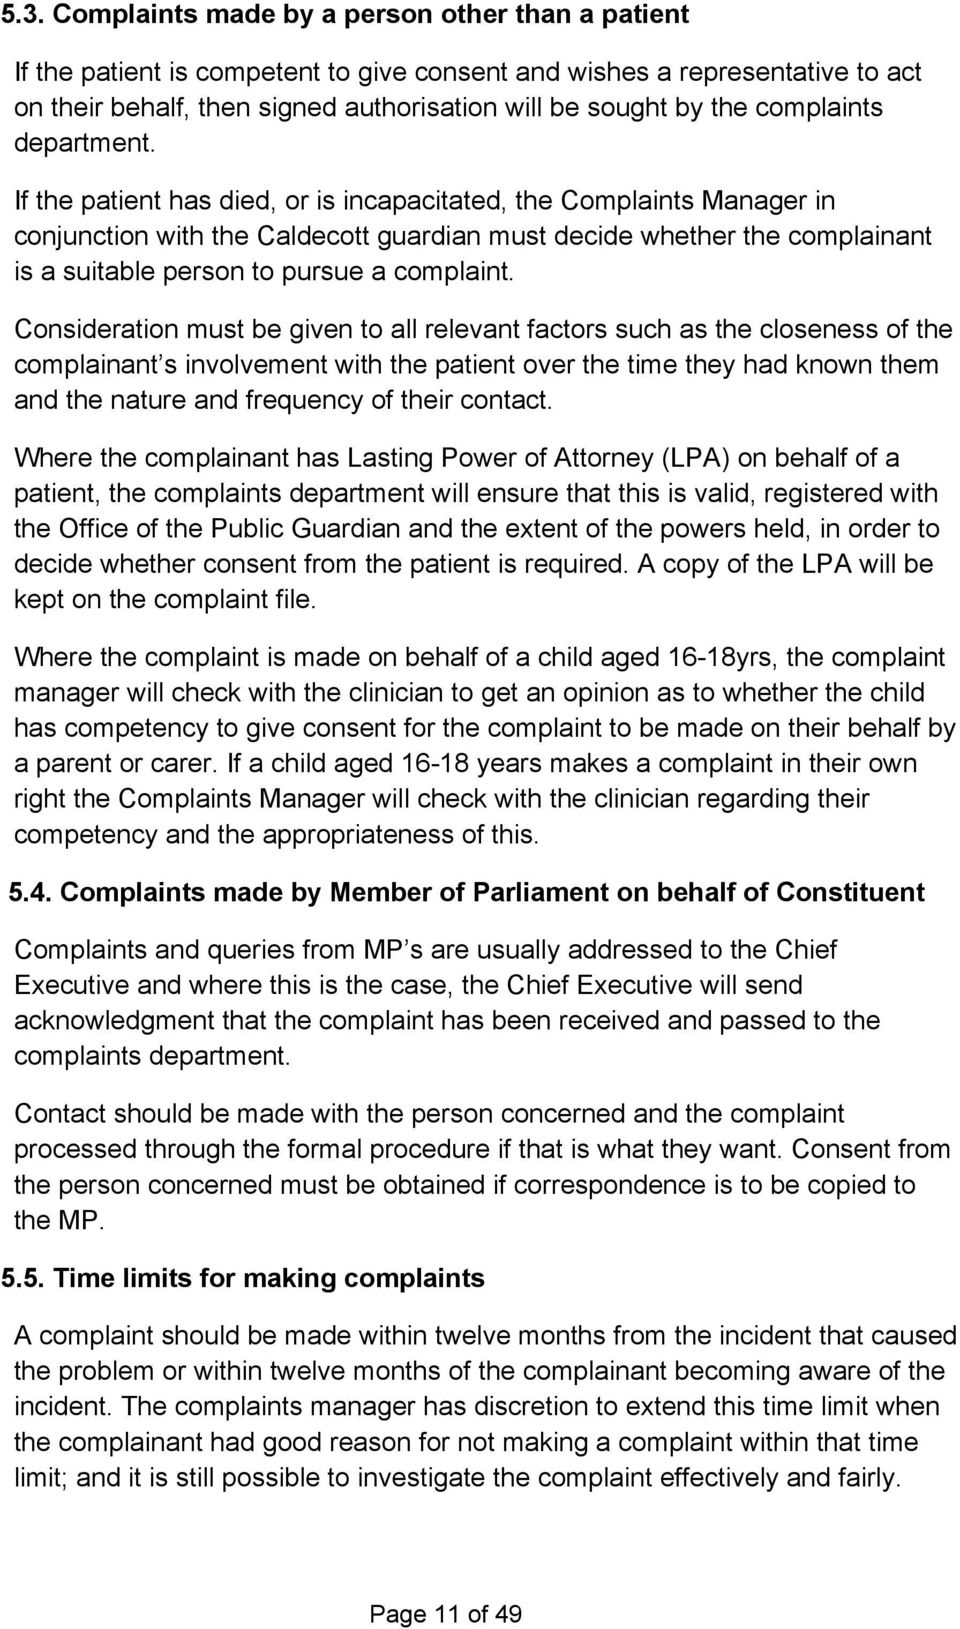 If the patient has died, or is incapacitated, the Complaints Manager in conjunction with the Caldecott guardian must decide whether the complainant is a suitable person to pursue a complaint.